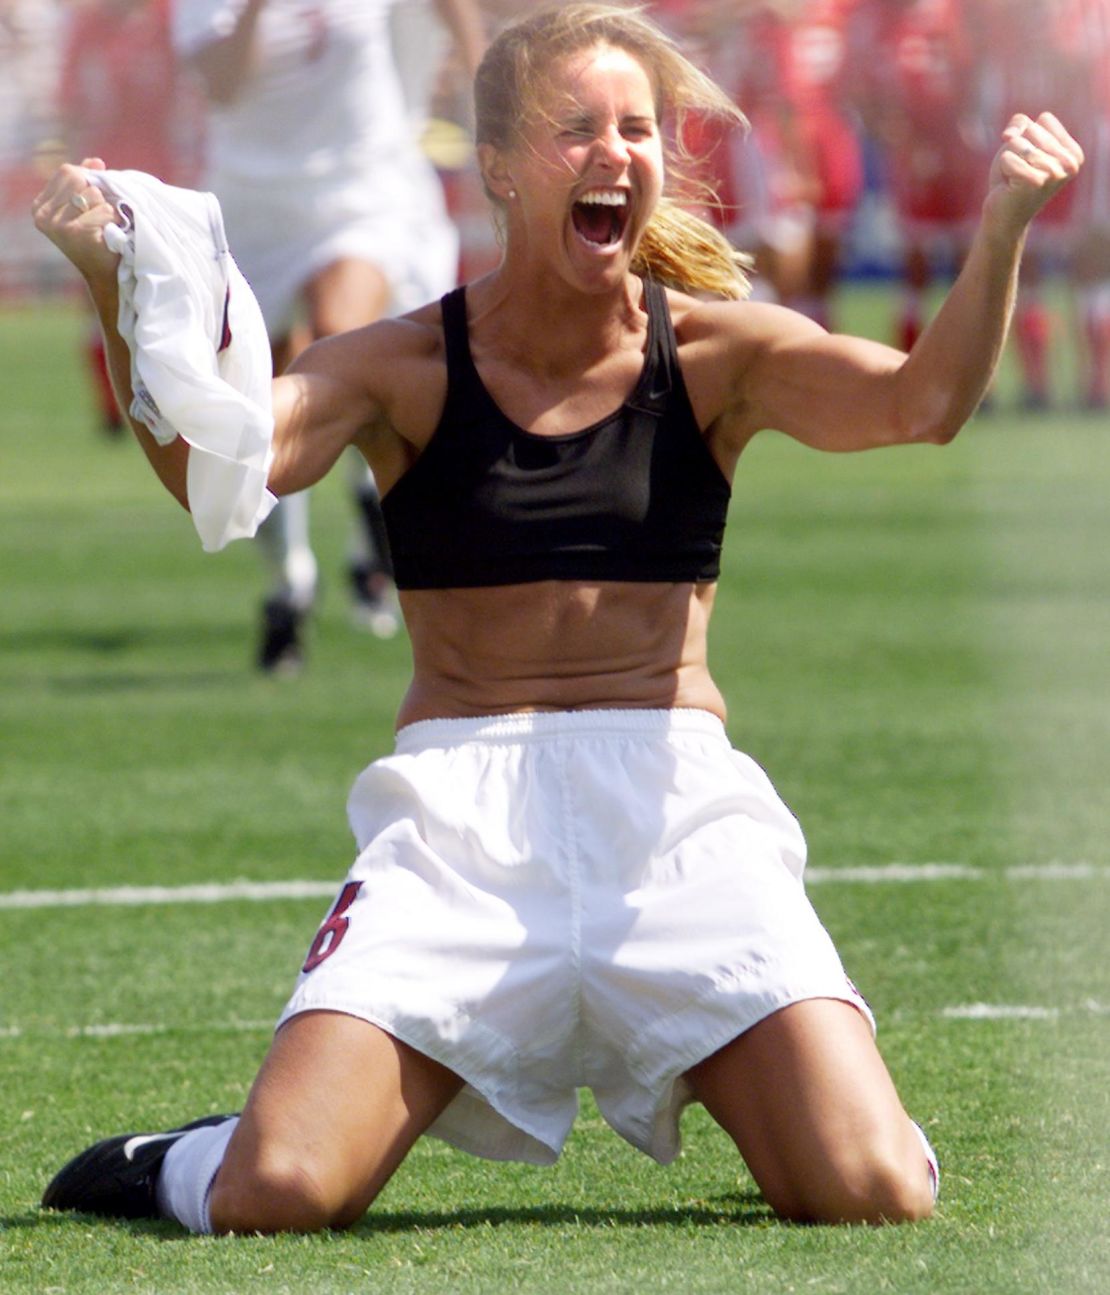 Brandi Chastain shouts after scoring the winning penalty kick in the 1999 Women's World Cup final. The victory was a pivotal moment for US women's soccer.